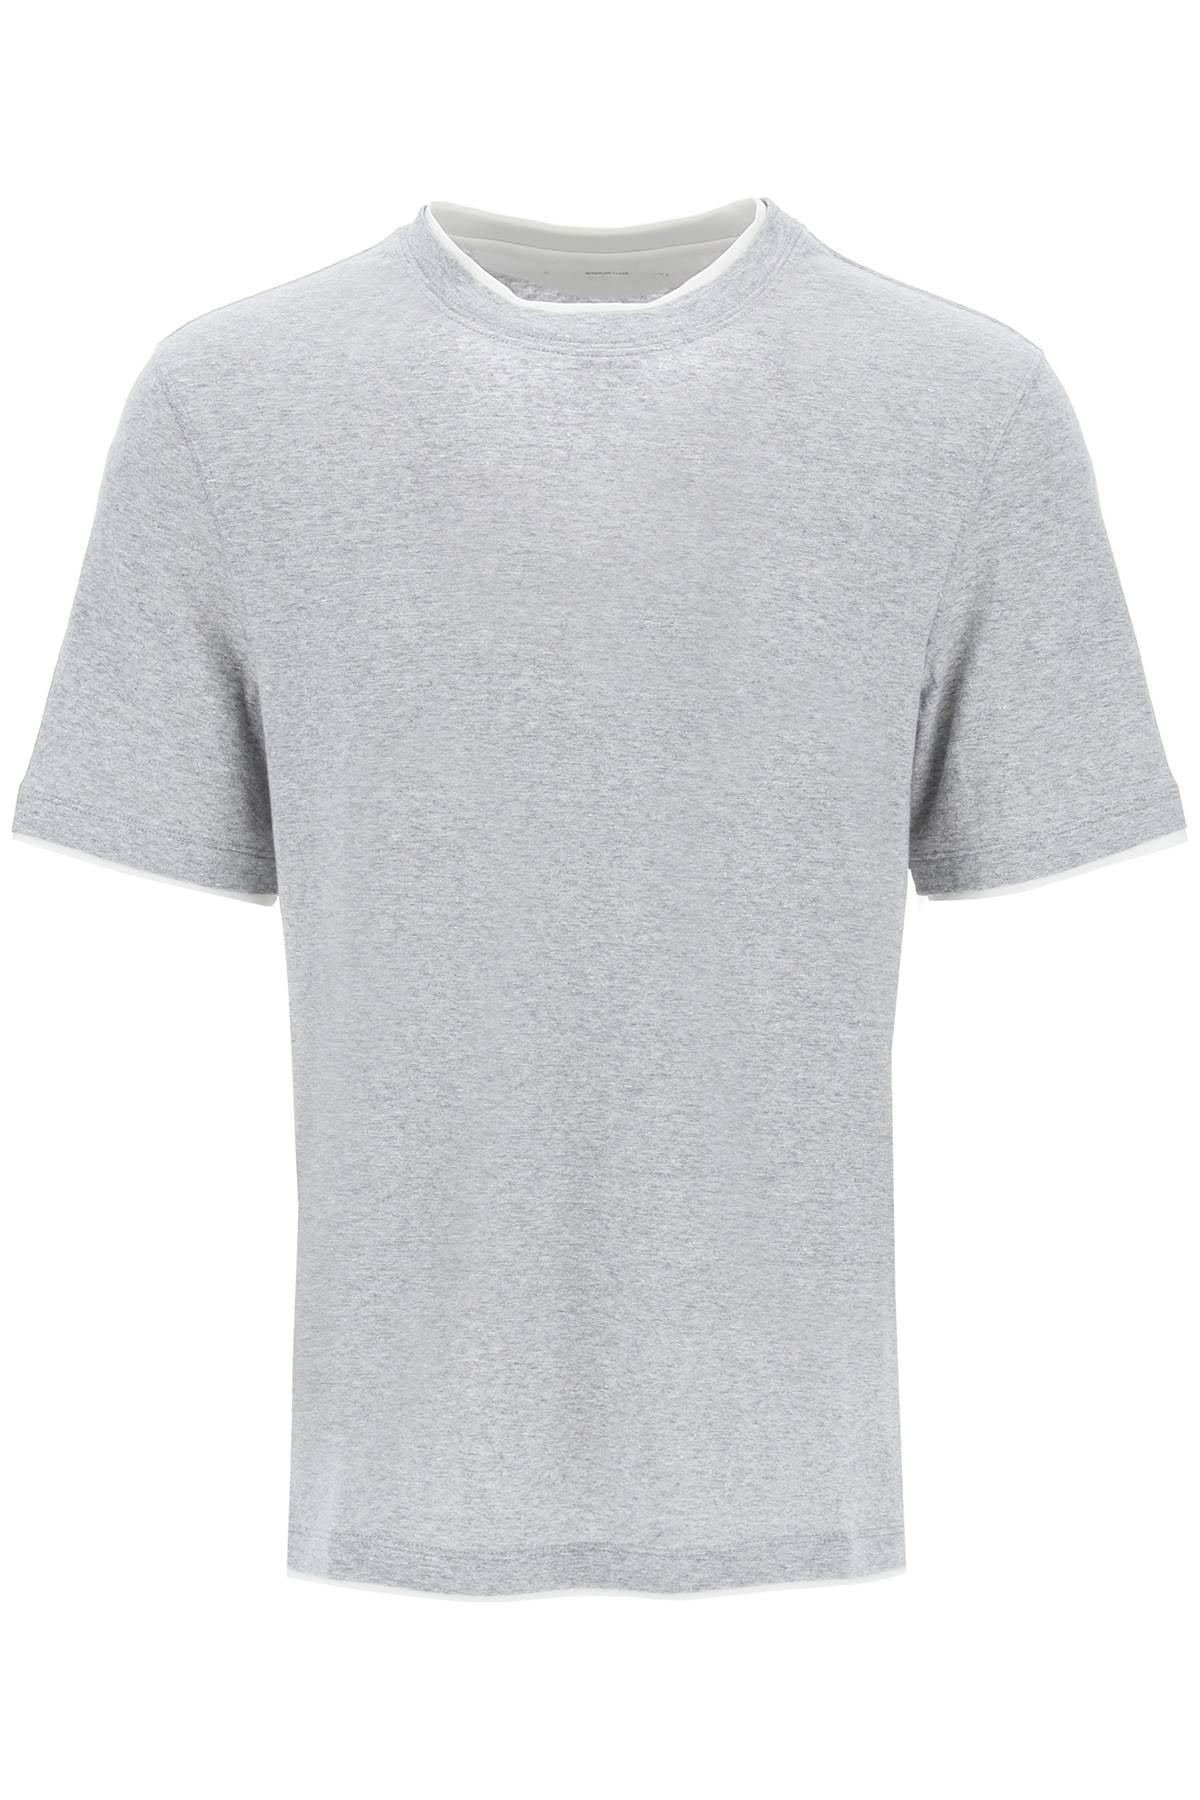 Brunello cucinelli overlapped-effect t-shirt in linen and cotton-0